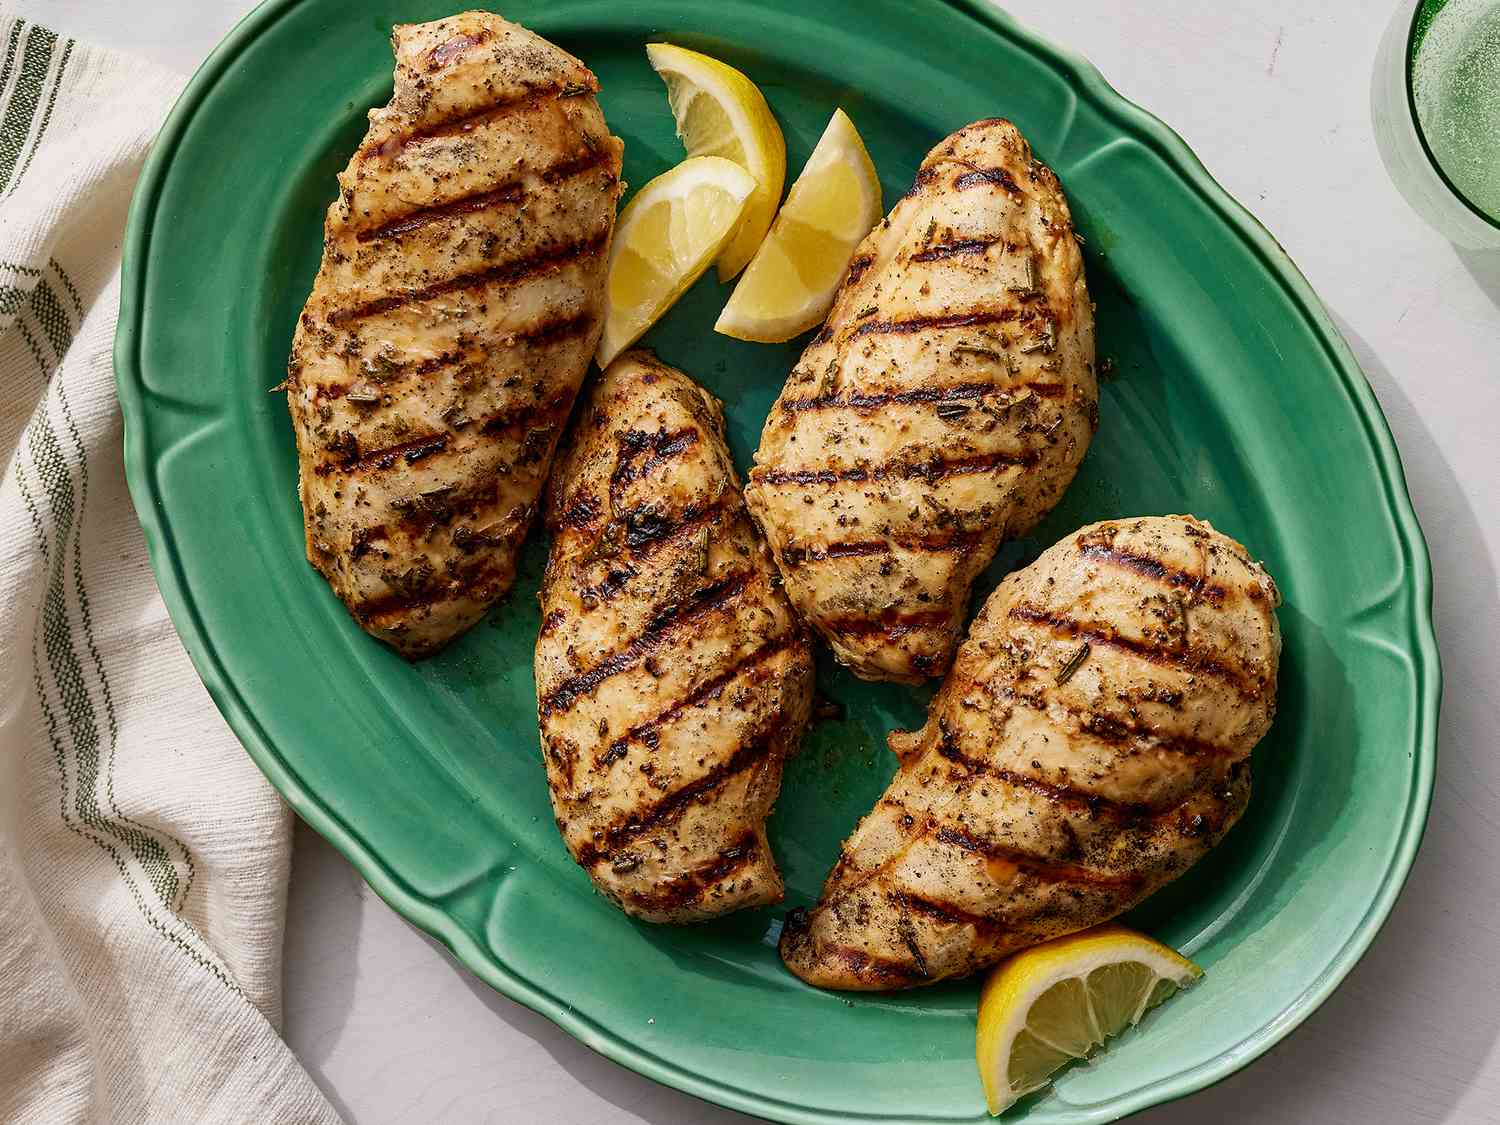 A top down view of 4 grilled lemon pepper chicken breasts on a mint green platter with 4 lemon wedges. 